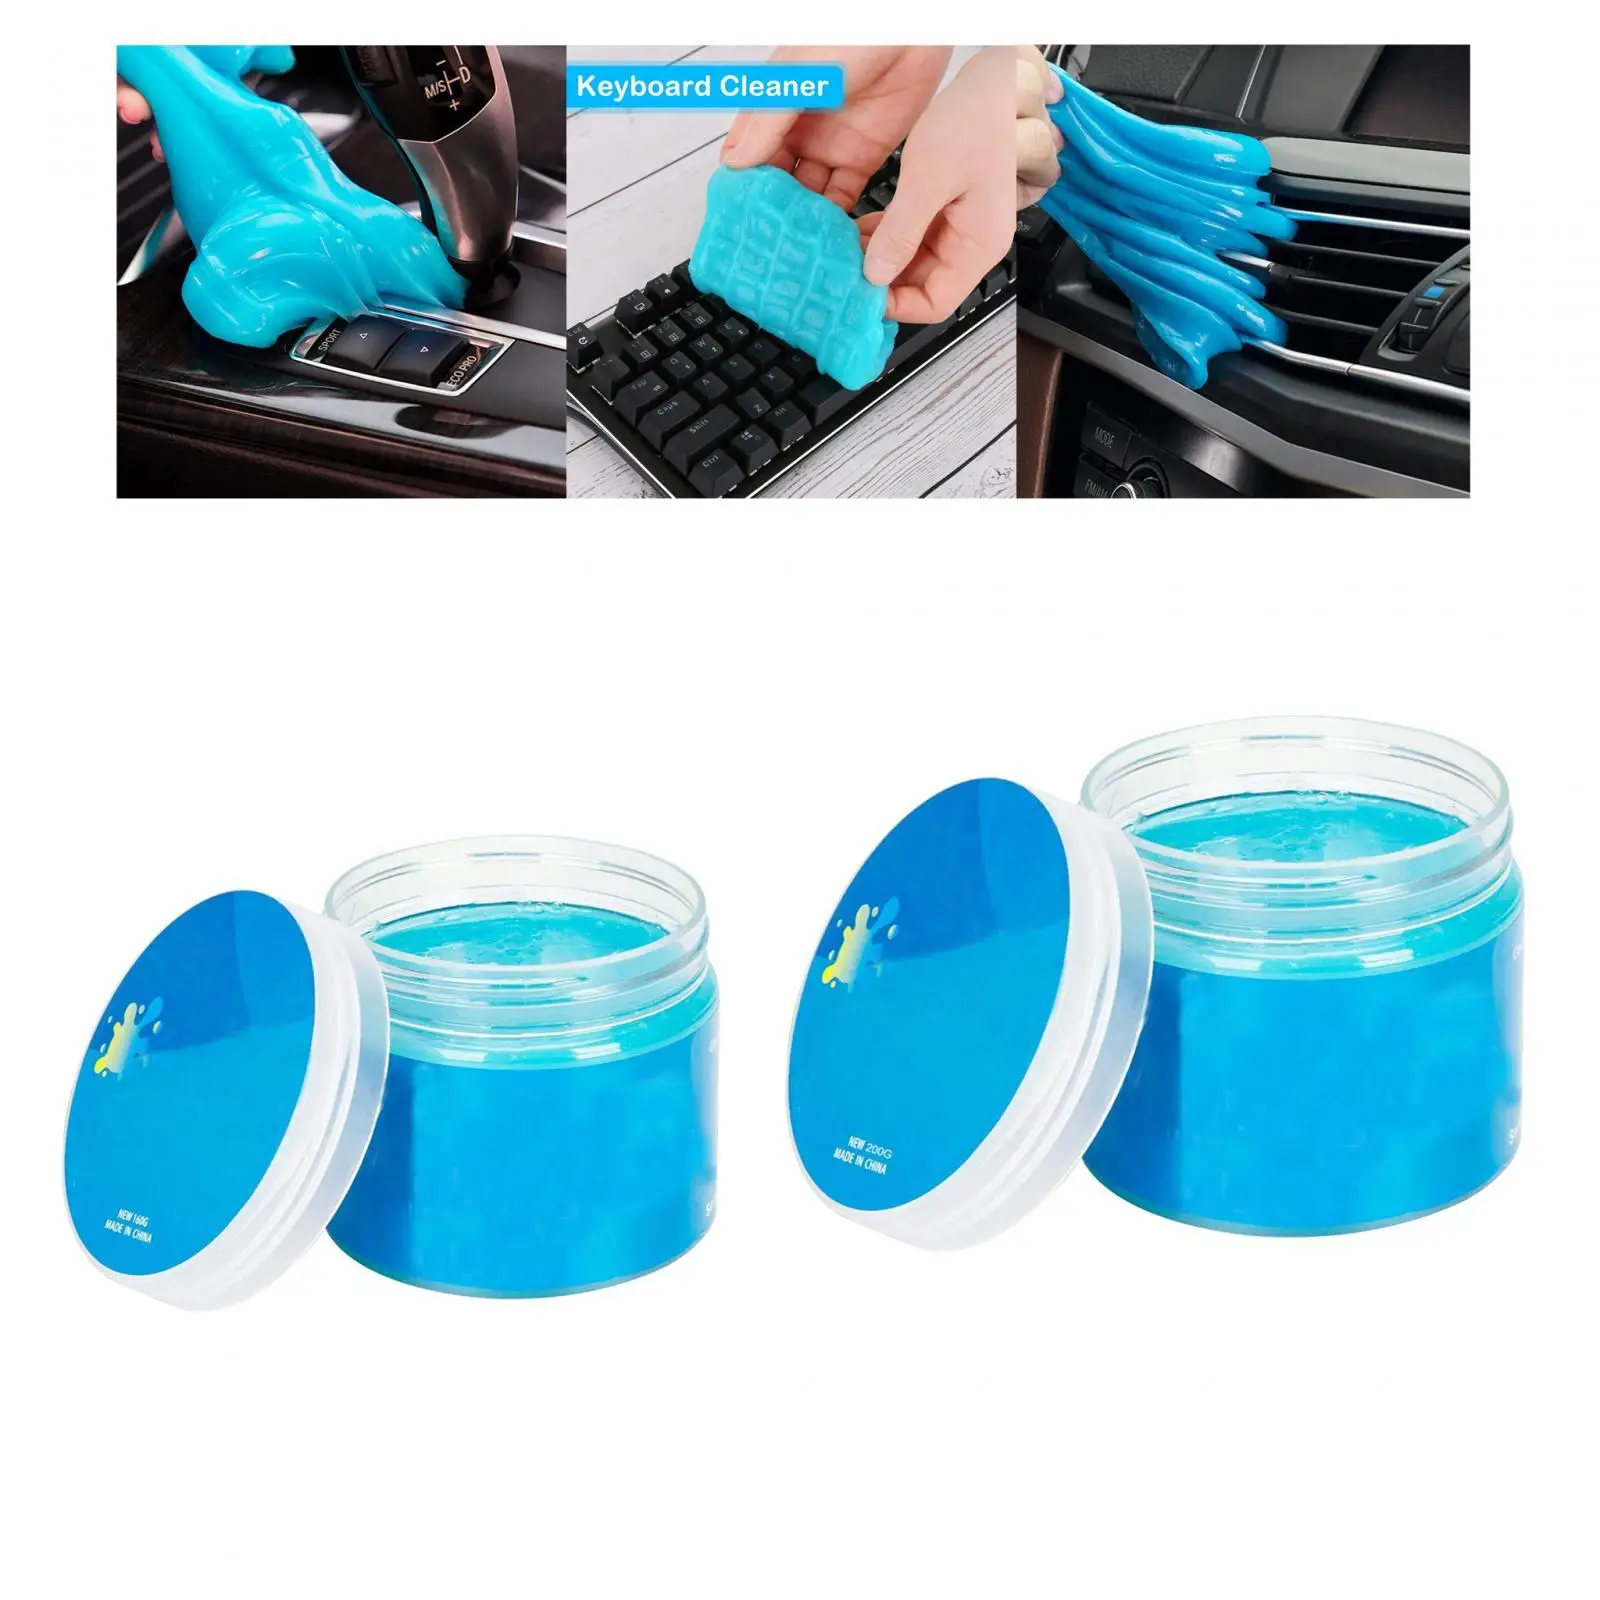 Cleaning Gel for Car, Reusable Automotive Detailing Tool Keyboard Cleaner Gel for Car Air Vent Laptops PC Cameras Dashboard